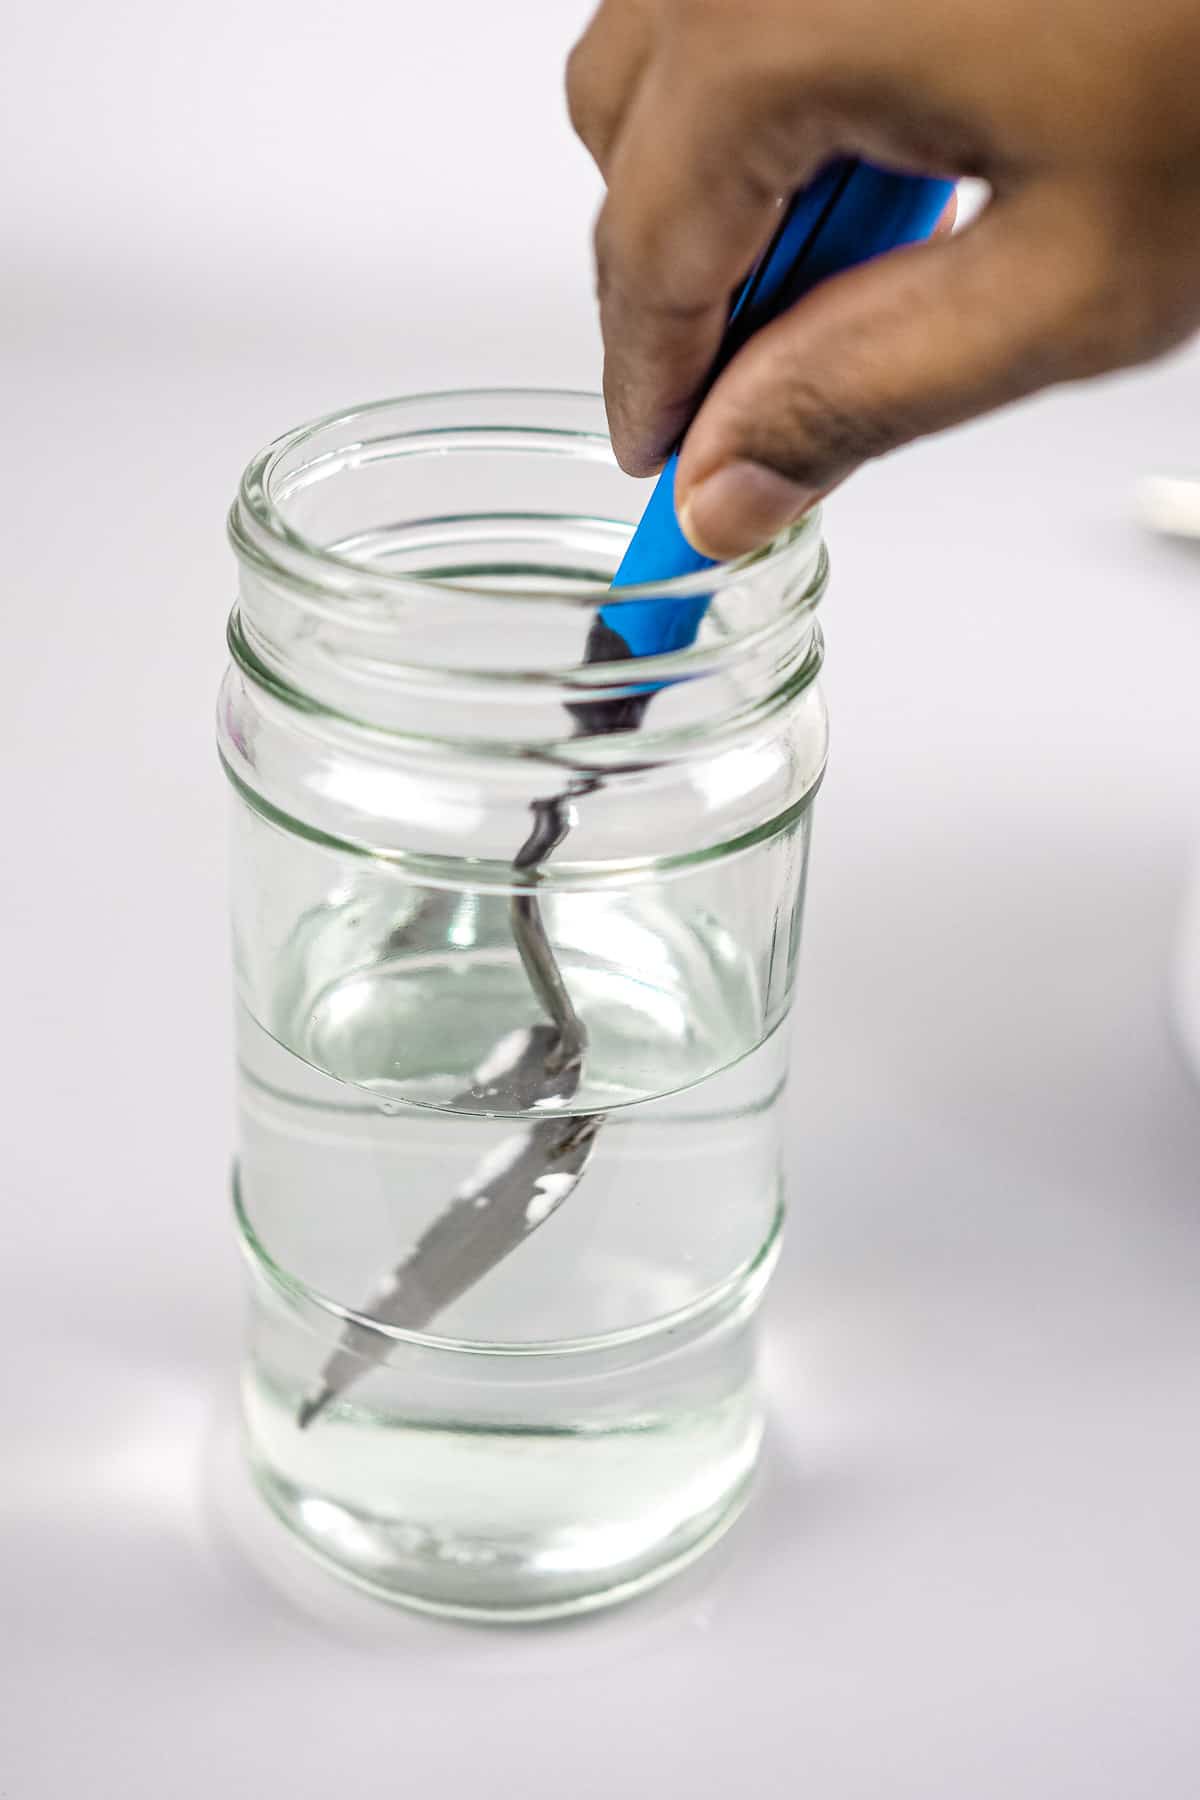 Dipping a spatula into a small jar of water